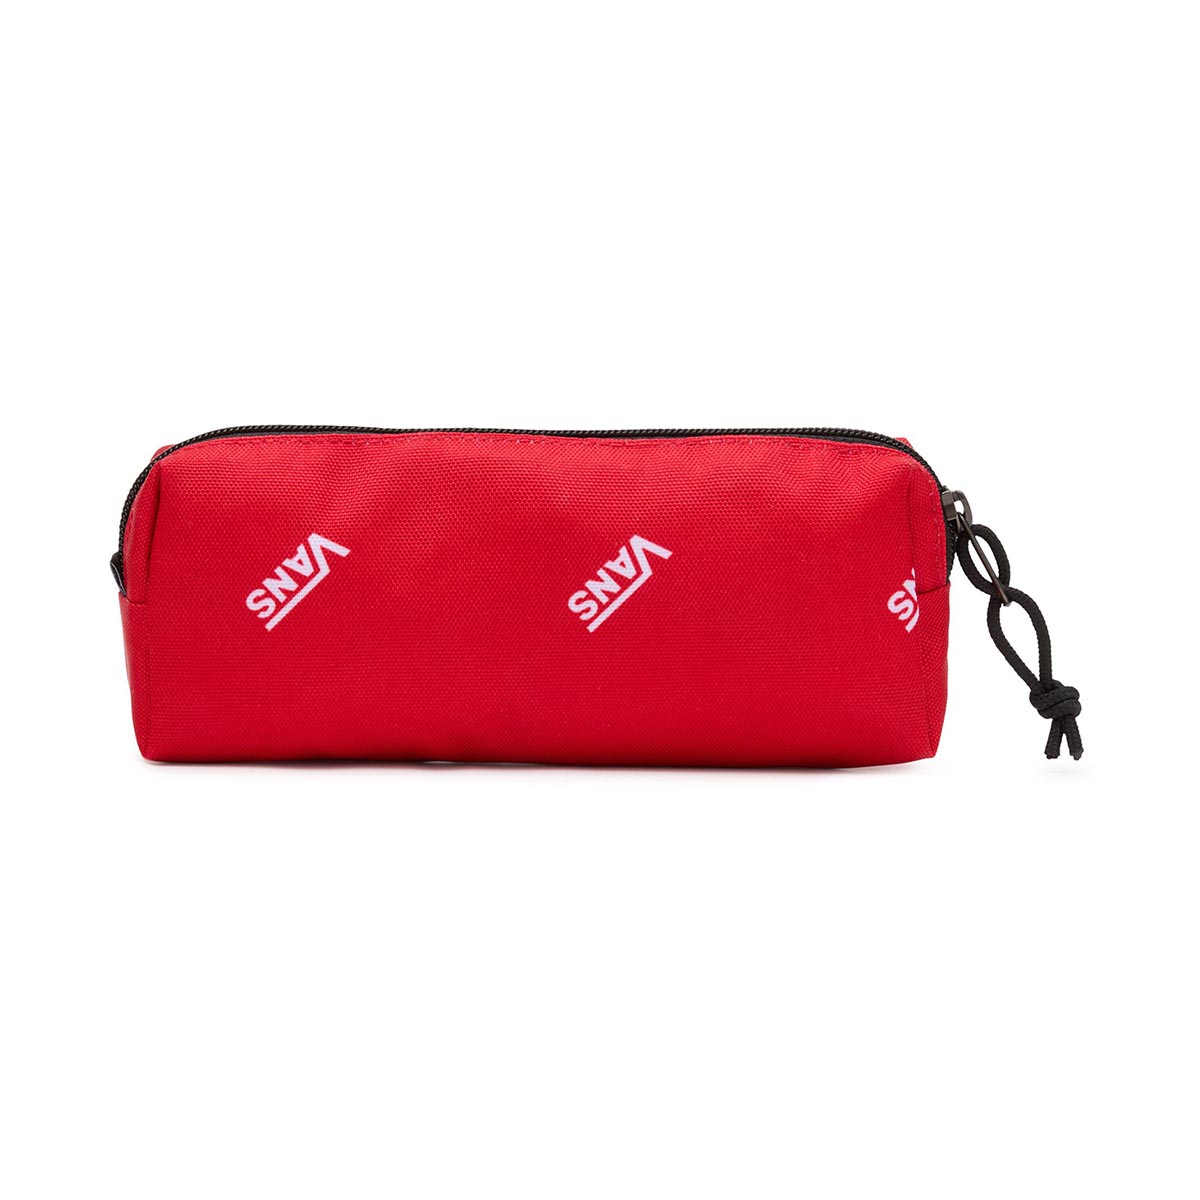 VANS - OFF THE WALL PENCIL POUCH 0.5 L